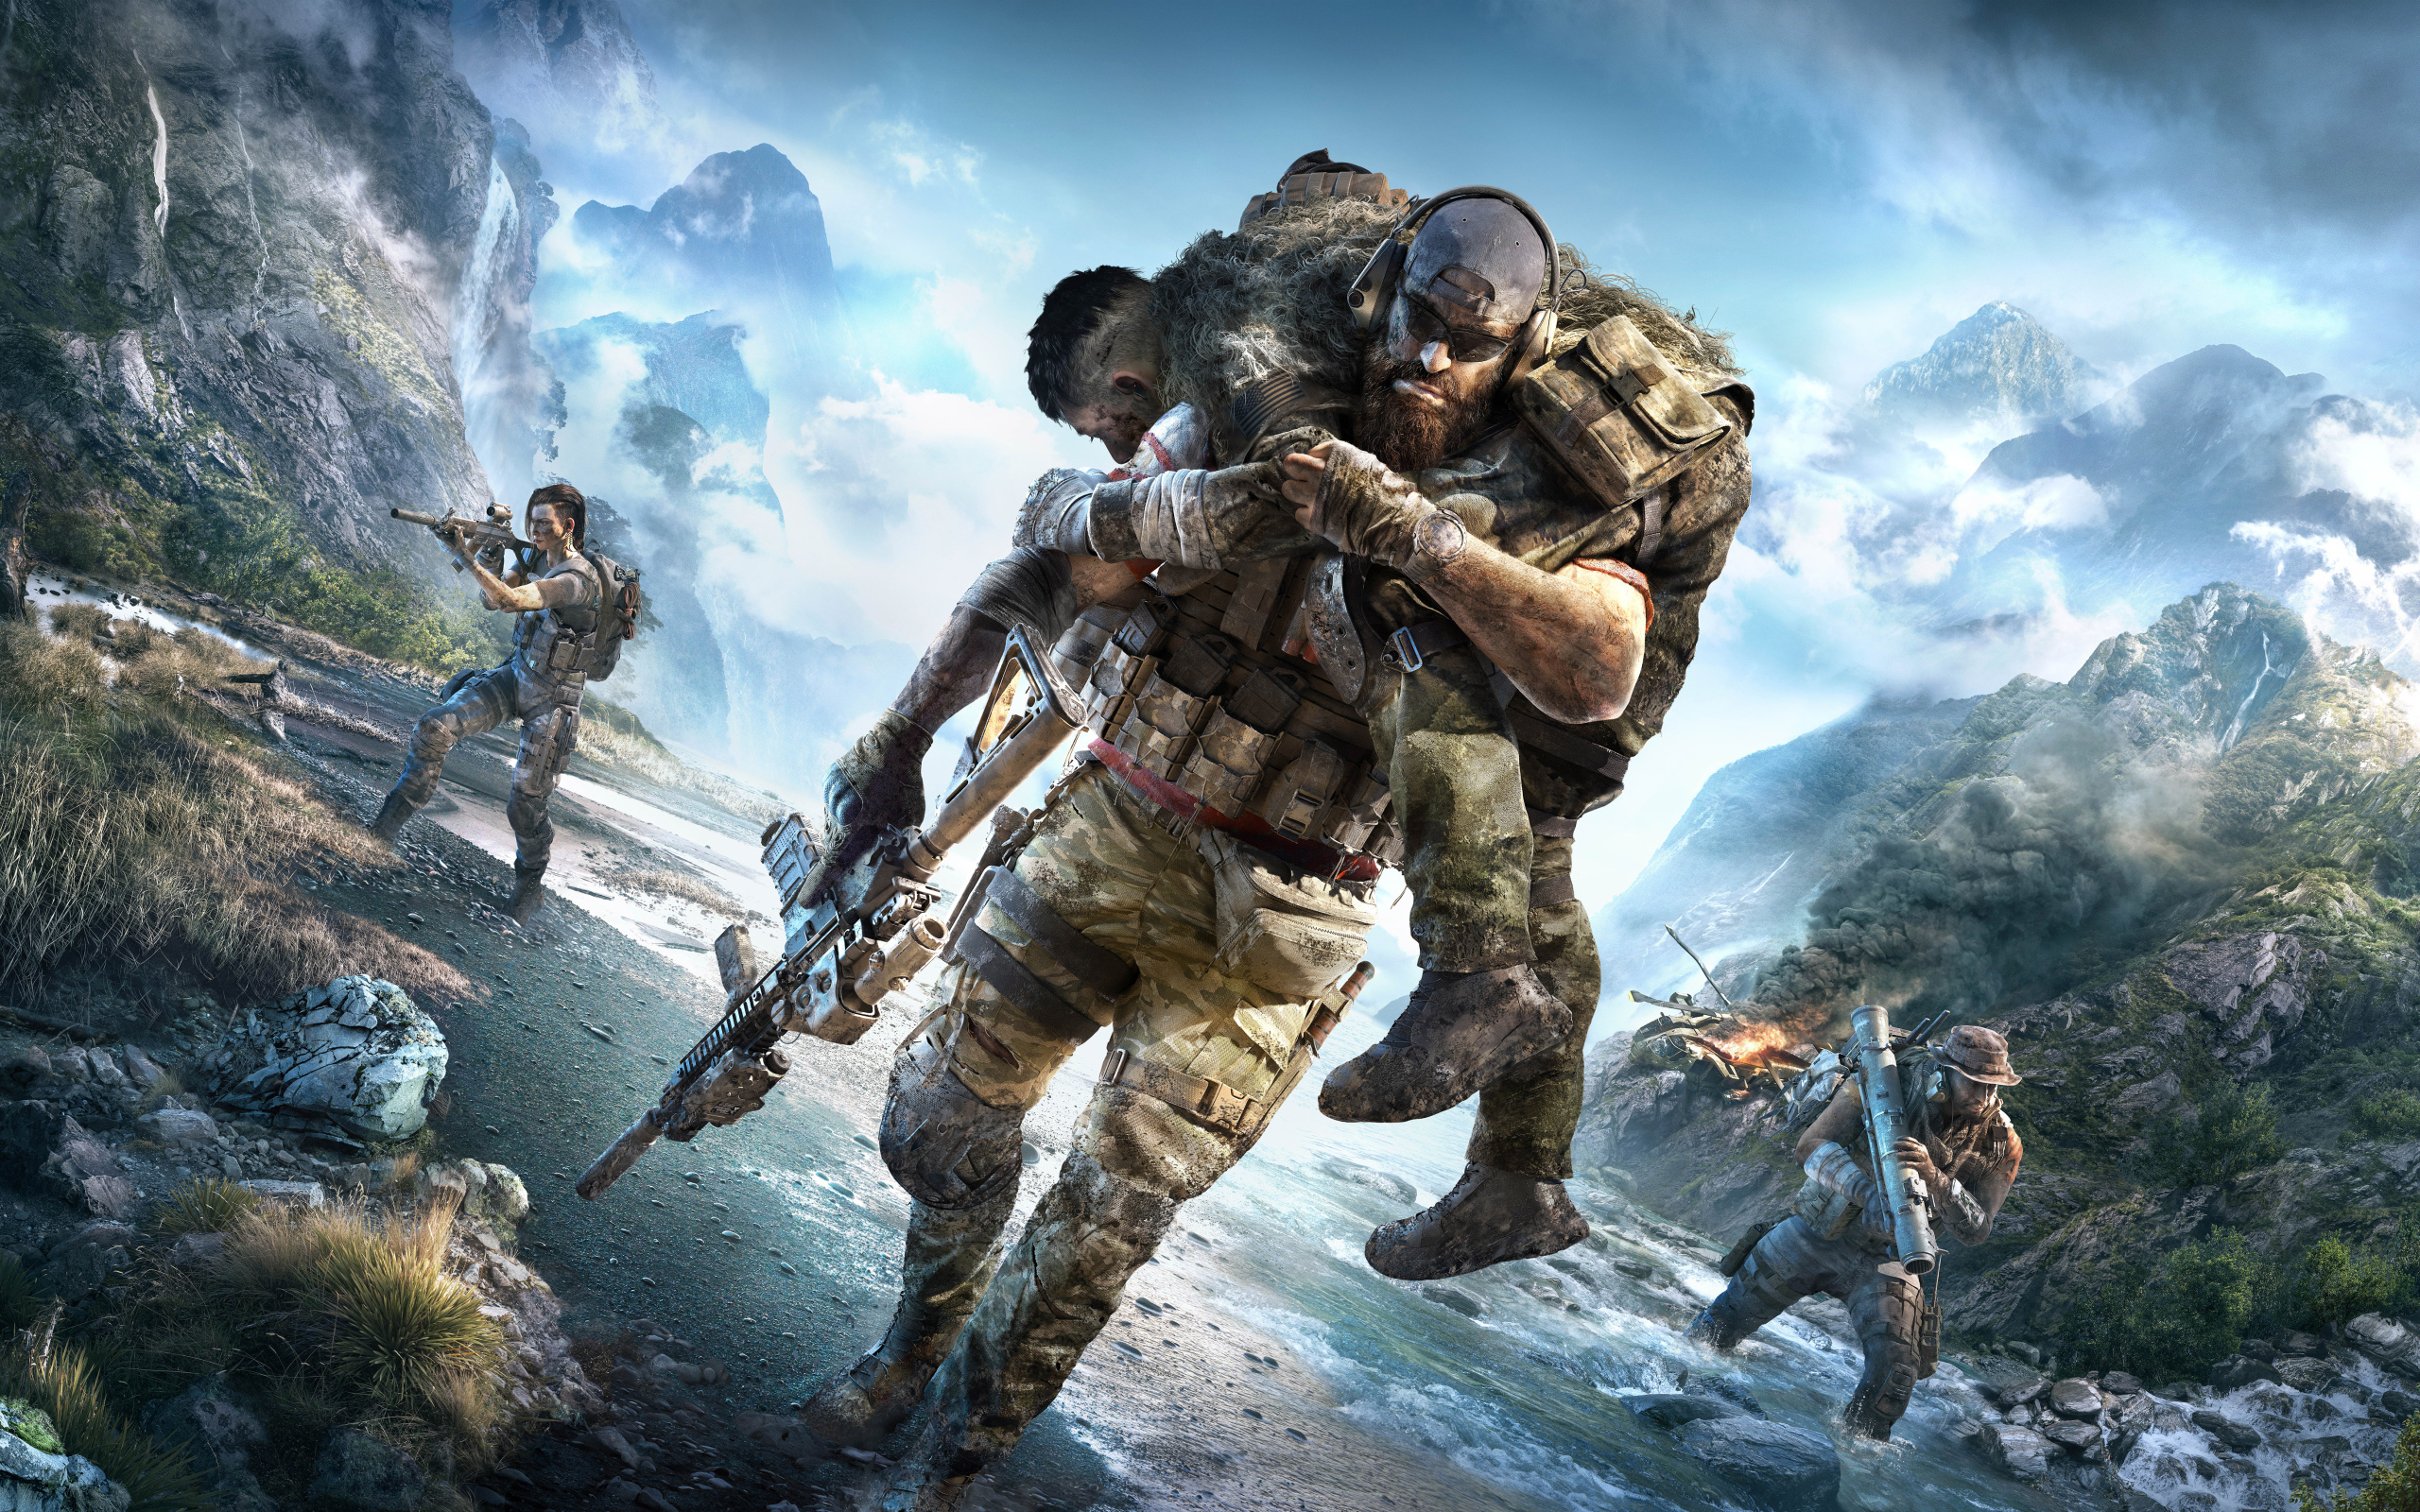 Frame computer game Tom Clancy's Ghost Recon Breakpoint, 2019